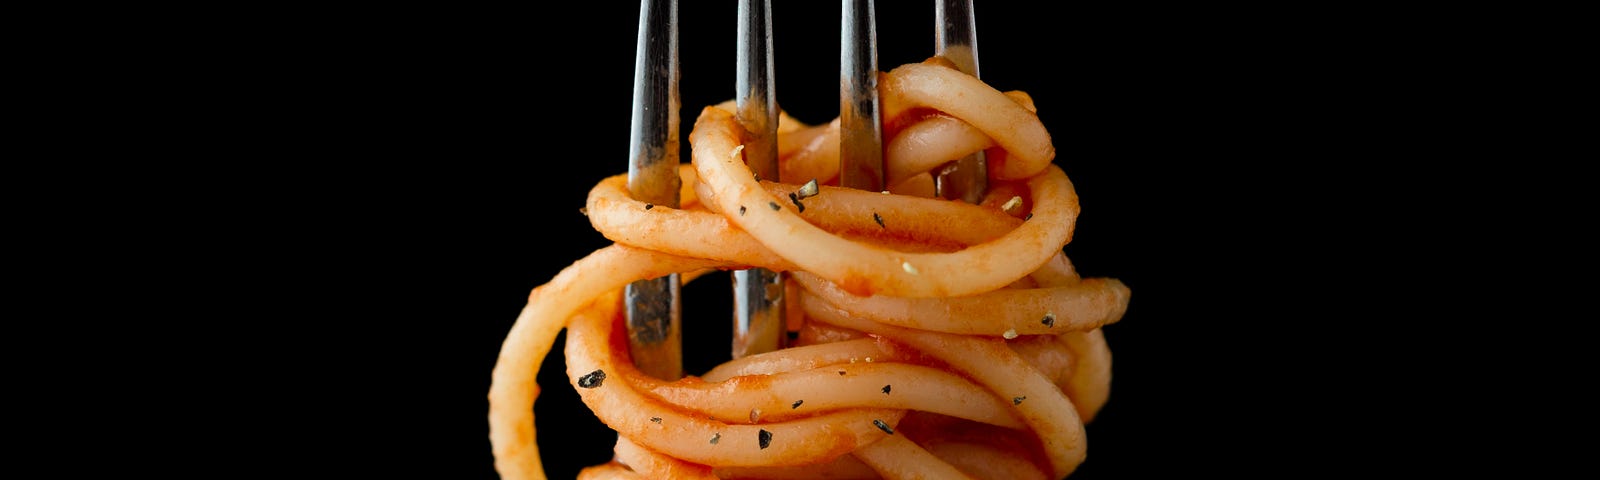 A silver fork extends upwards in the center of the image, with spaghetti weaving in and out of the tines. There are smidges of tomato sauce and spices.